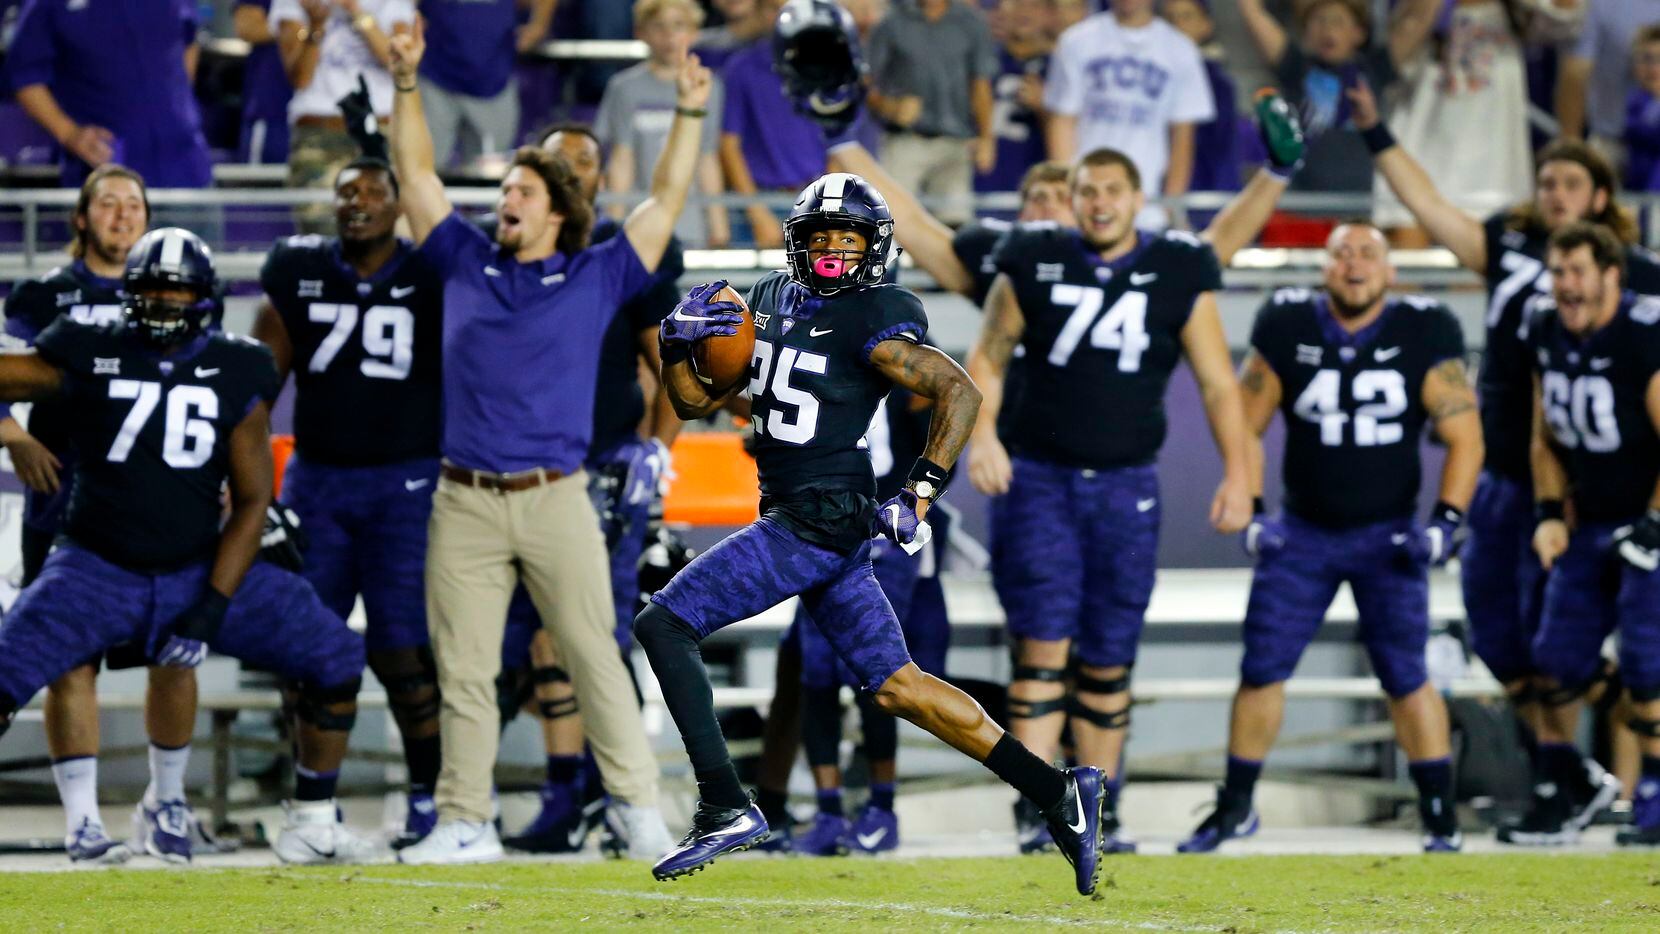 TCU Horned Frogs wide receiver KaVontae Turpin (25) races across the field for a long third...